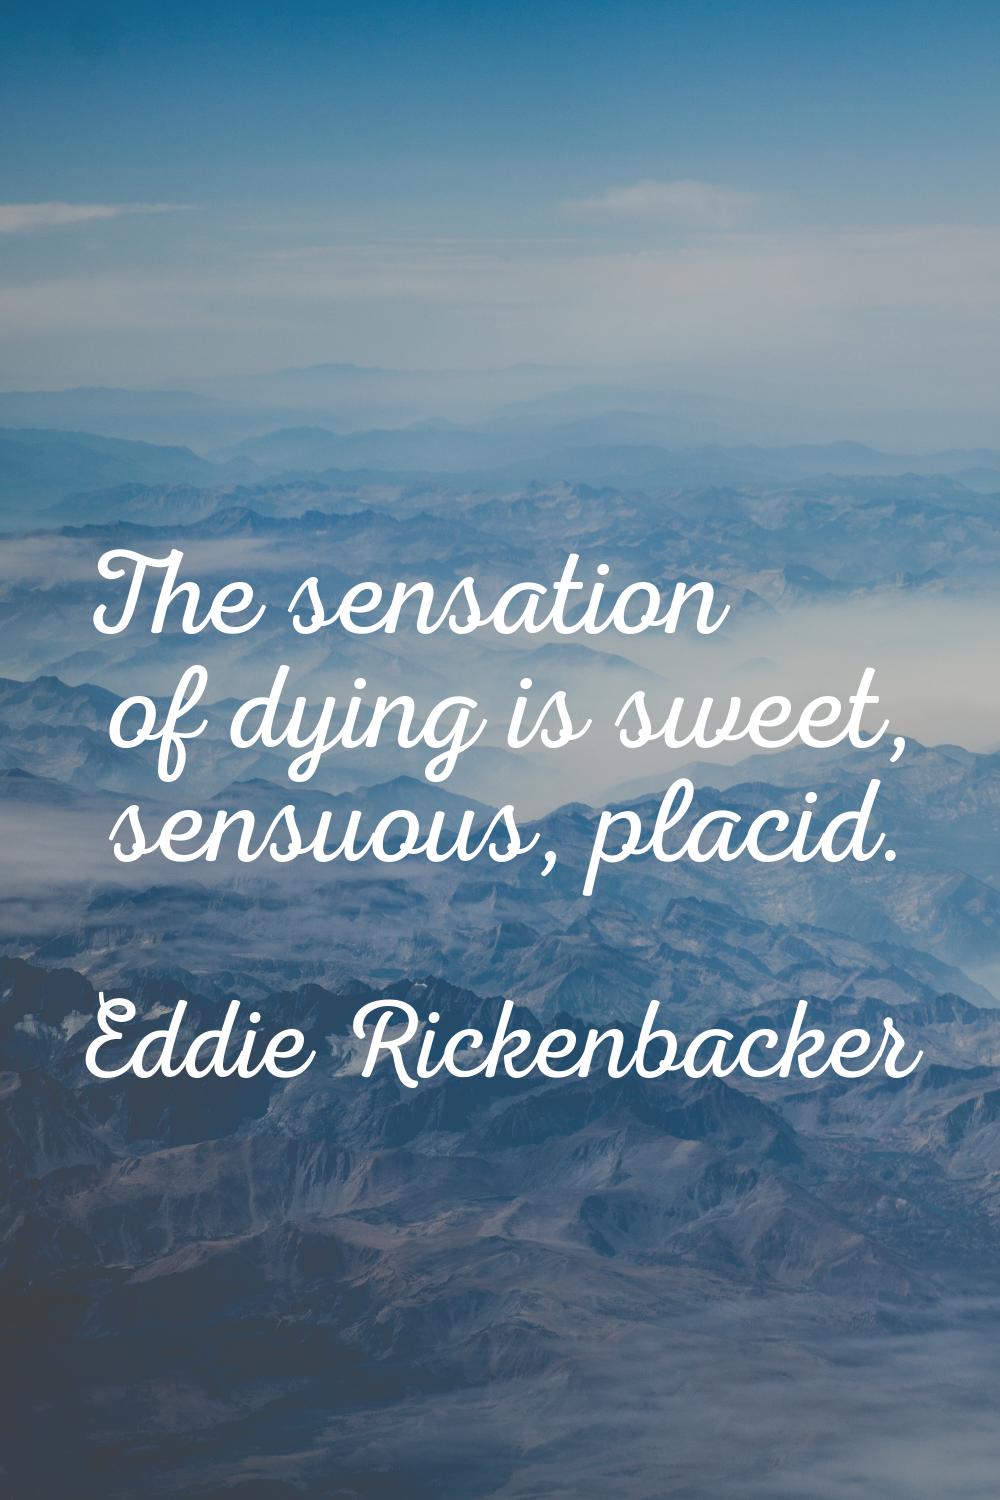 The sensation of dying is sweet, sensuous, placid.